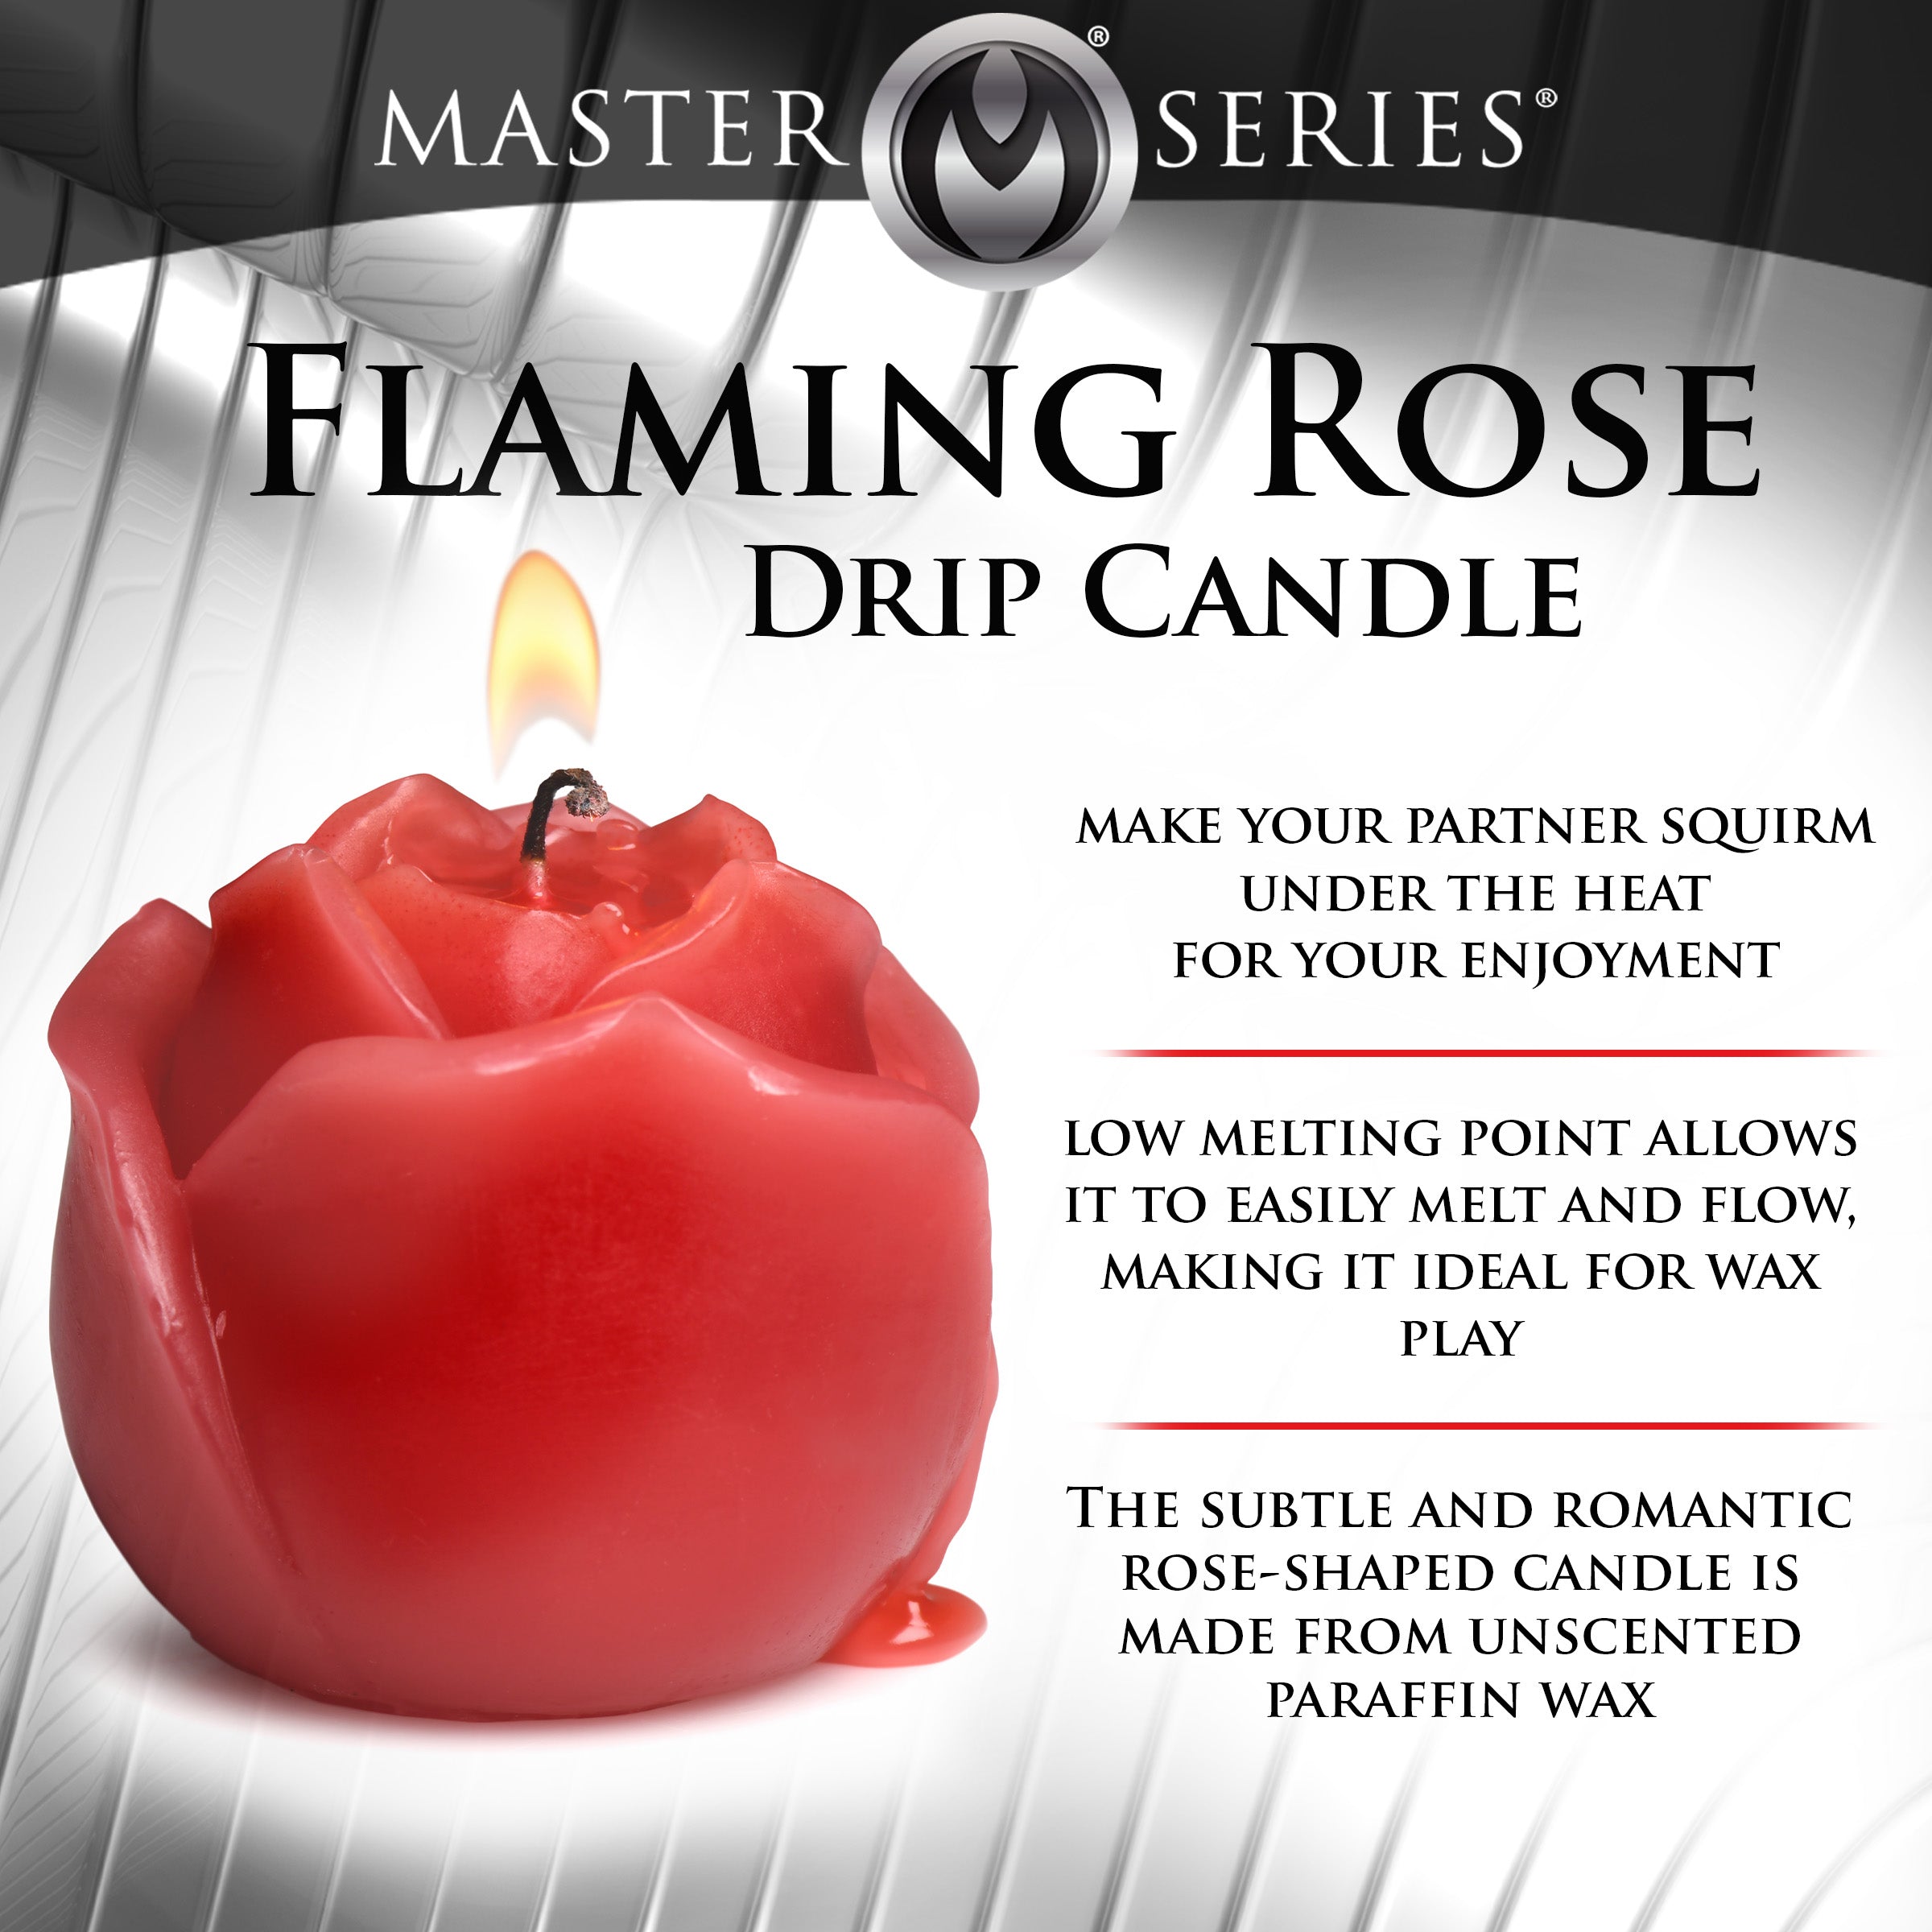 Flaming Rose Drip Candle